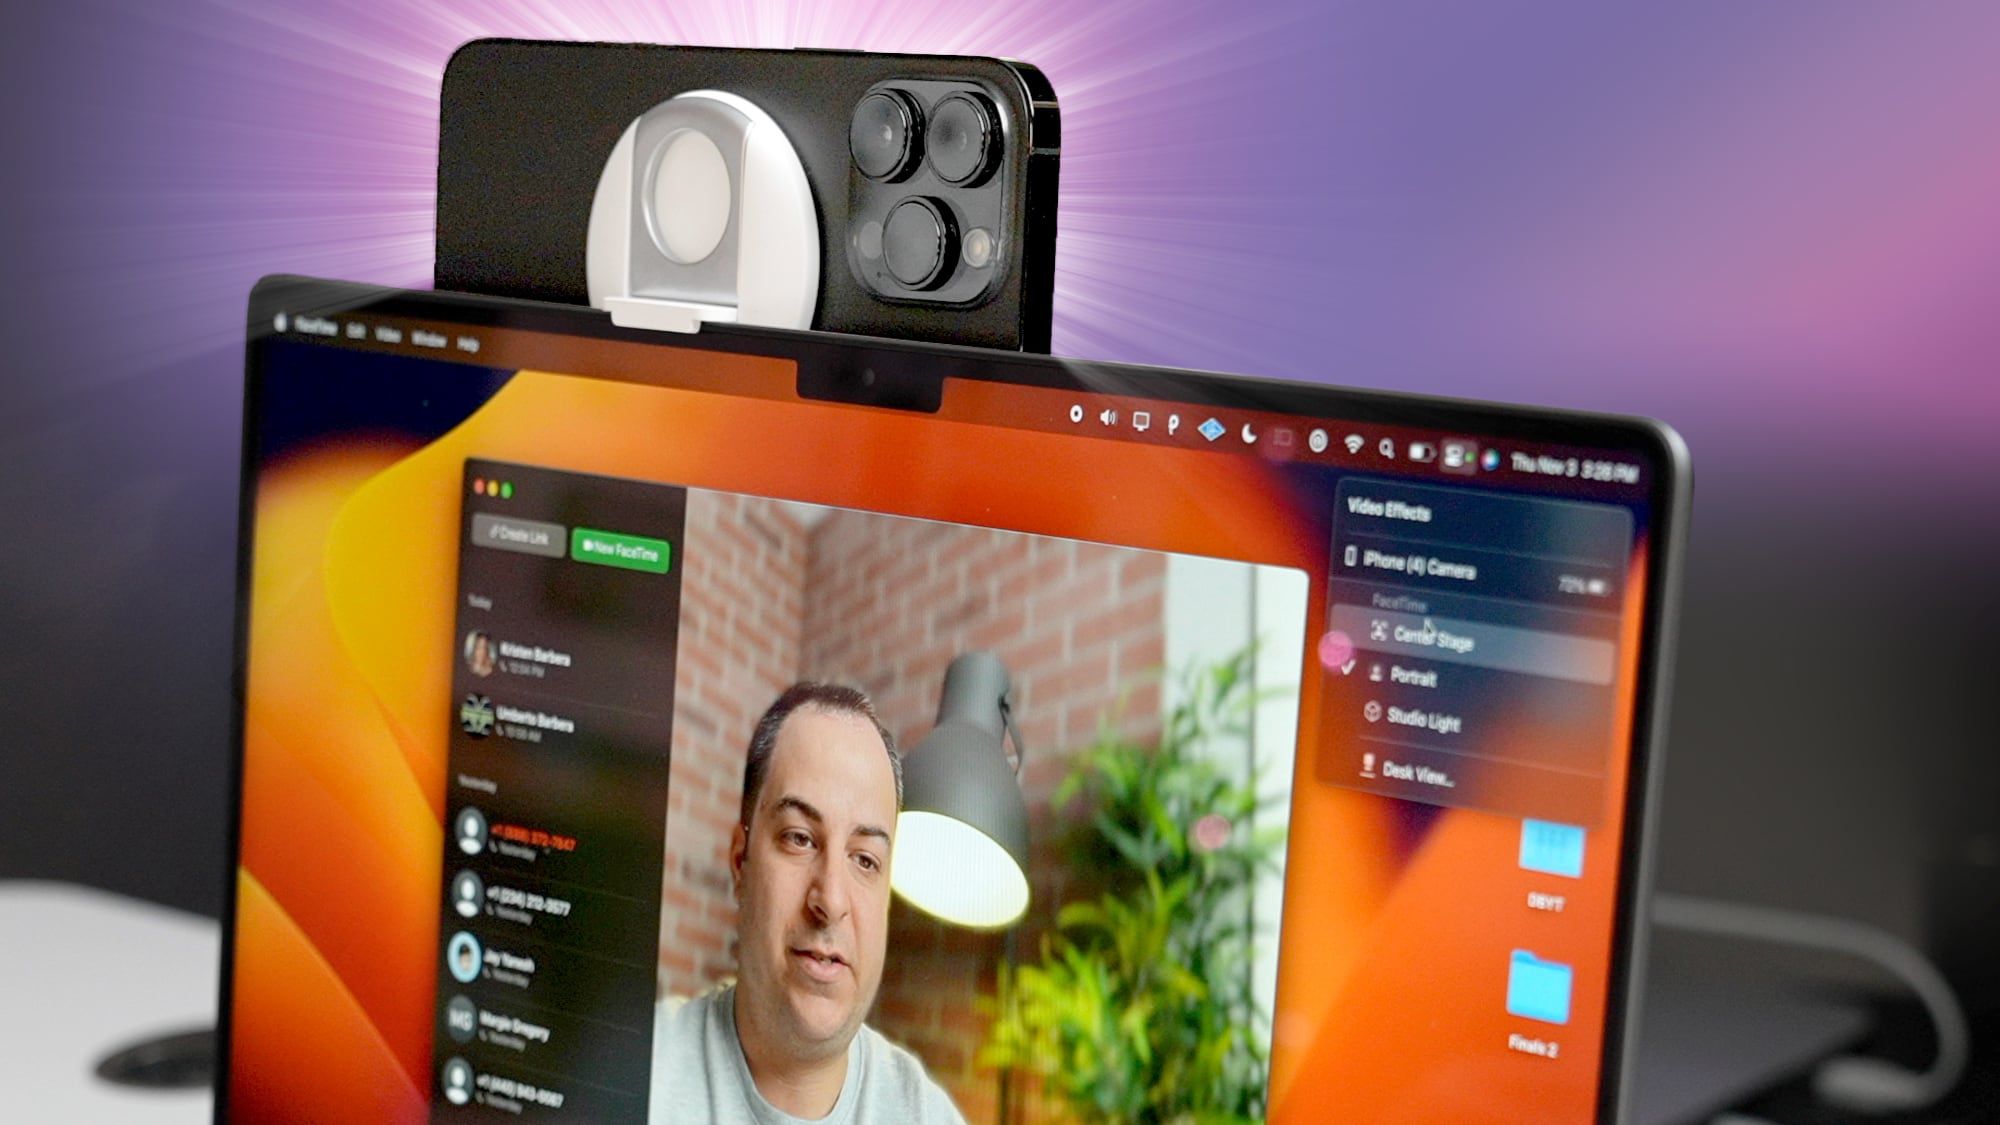 Video: Testing Continuity Camera With Belkin's iPhone MagSafe Mount